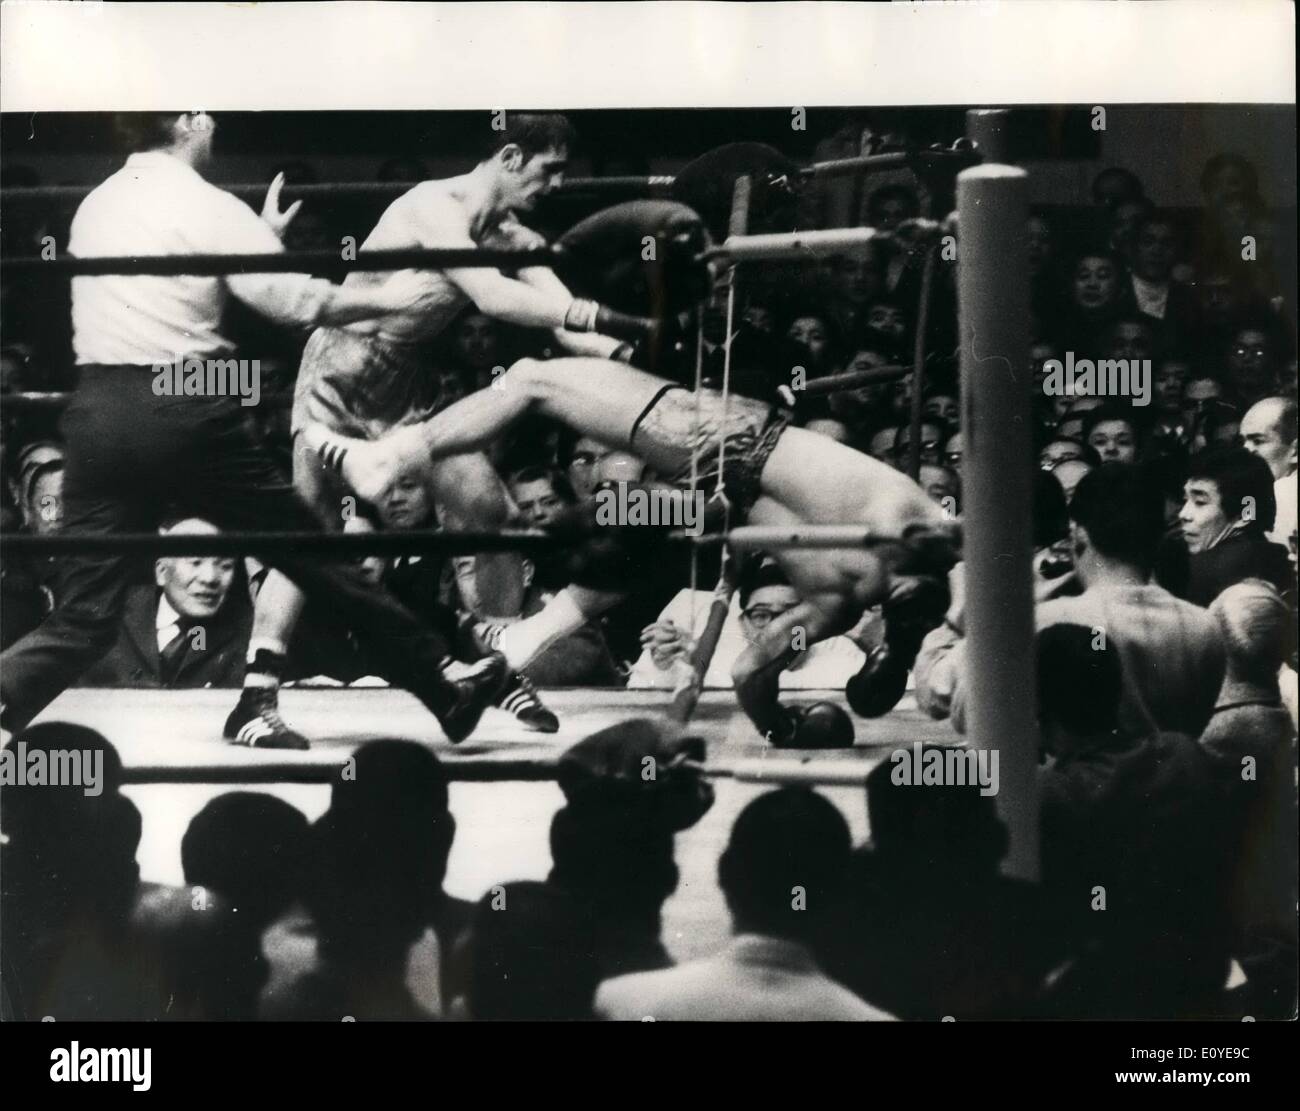 Jan. 01, 1970 - Famechon retains world title. Johnny Famechow of Australia retained his world feather weight in Tokyo on January 6th, when he knocked out fighting harada of japan in the 14th round. Photo shows Johnny Famechow punches harada through the ropes for the 14th. round knockout in Tokyo. Stock Photo